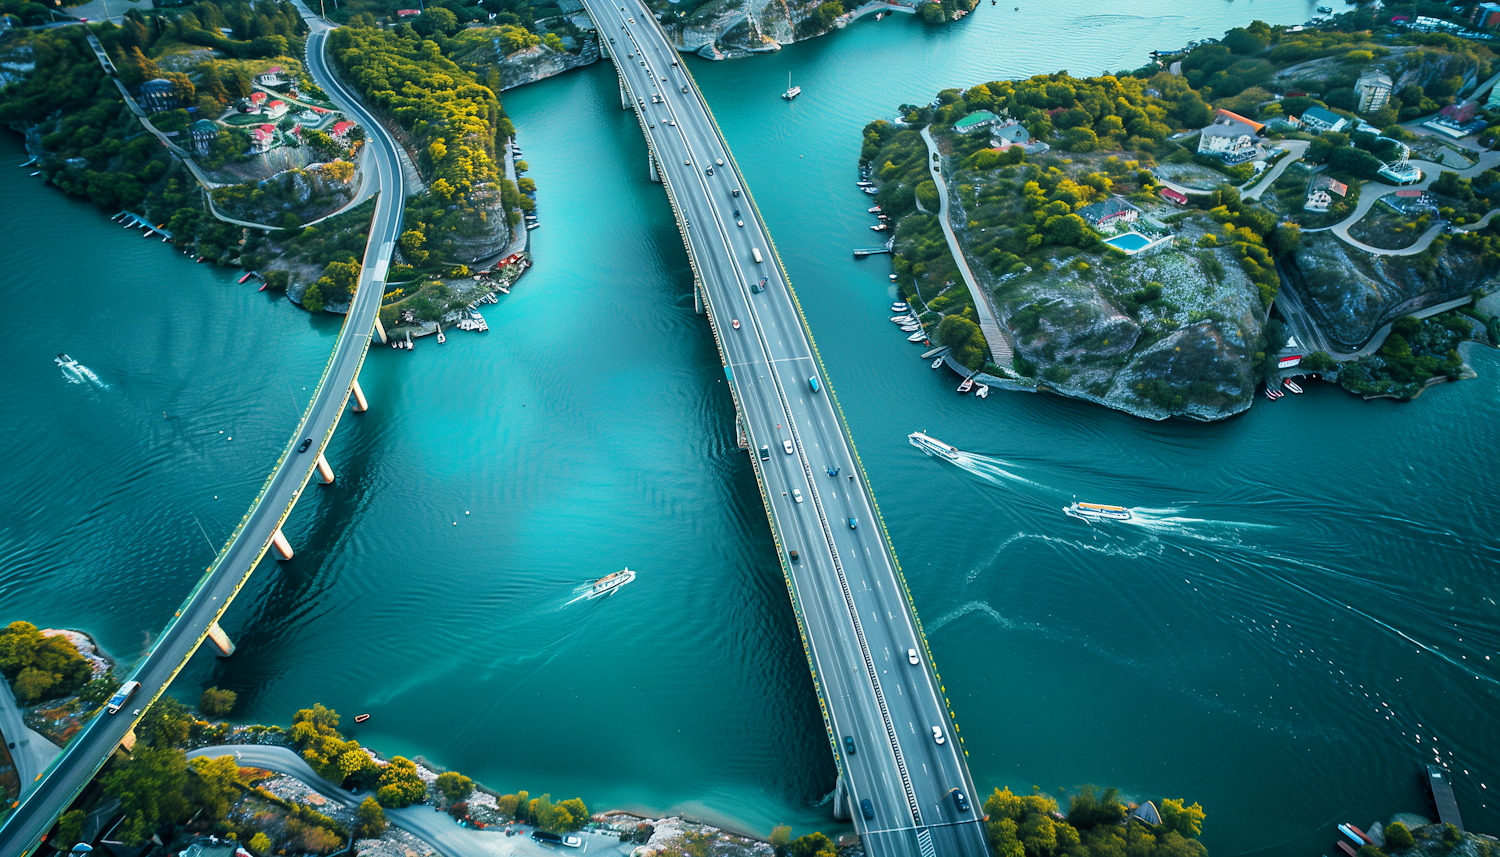 Aerial View of Busy Bridge over Turquoise River